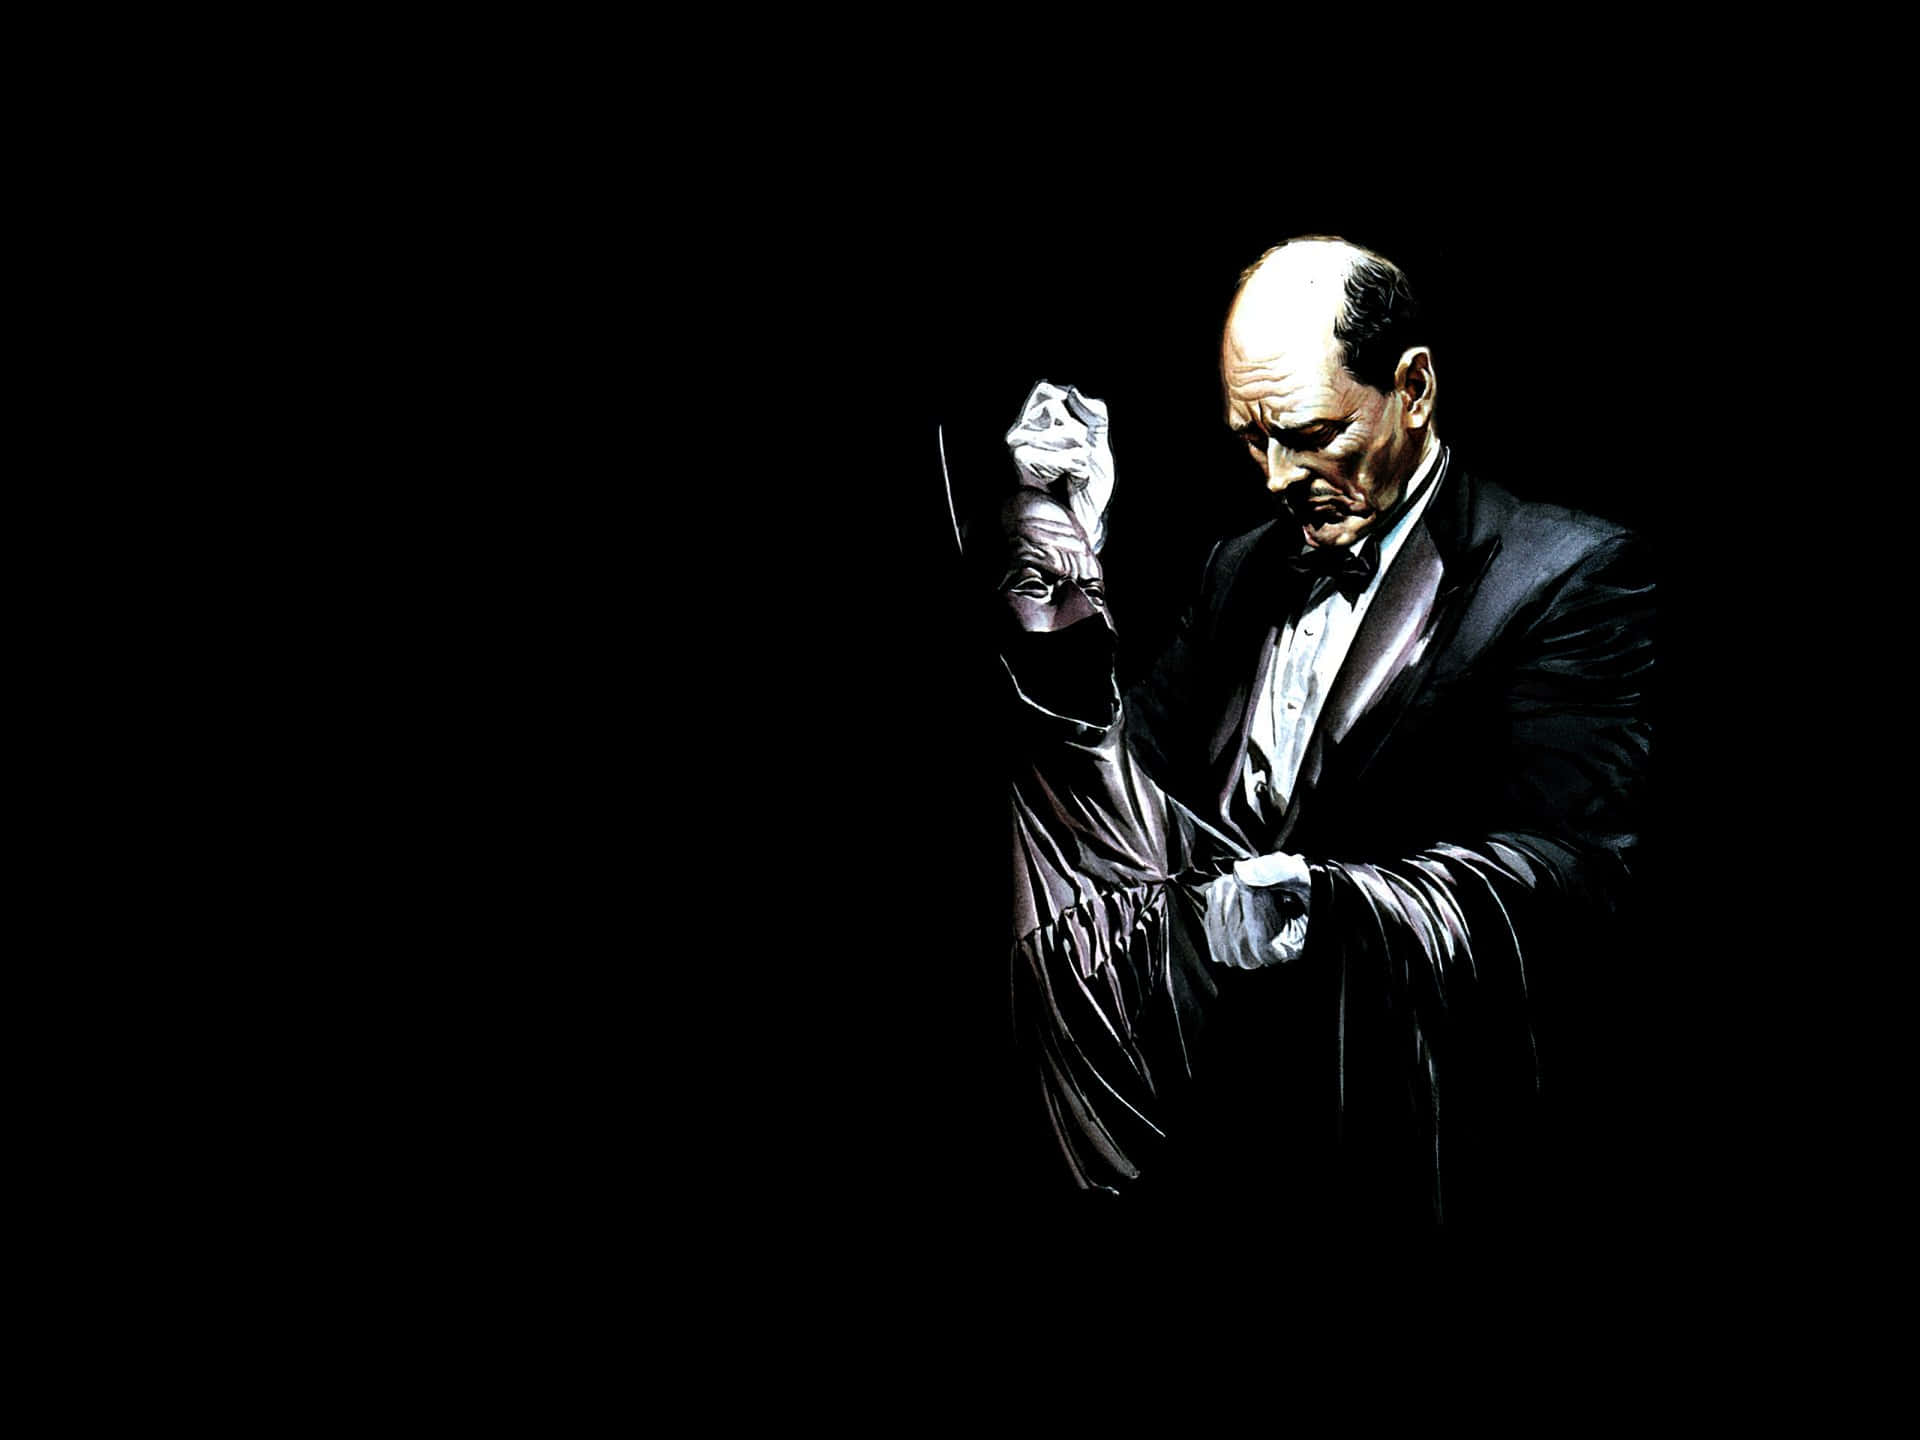 Alfred Pennyworth, the Trusted Confidant of Batman and Wayne Family Wallpaper